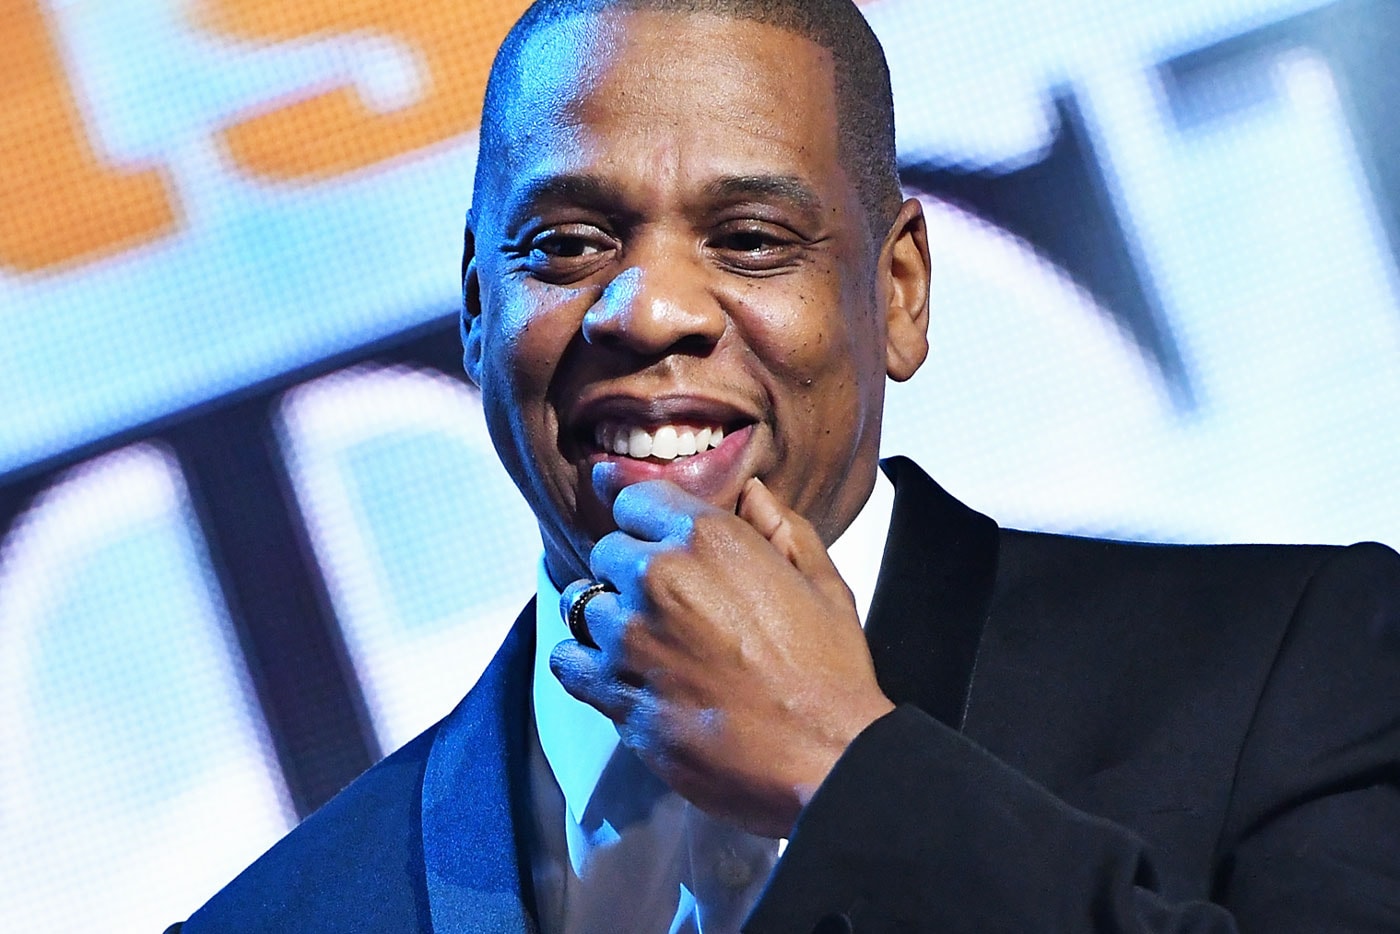 Watch JAY Z's Interview and Performance on 'Kimmel'